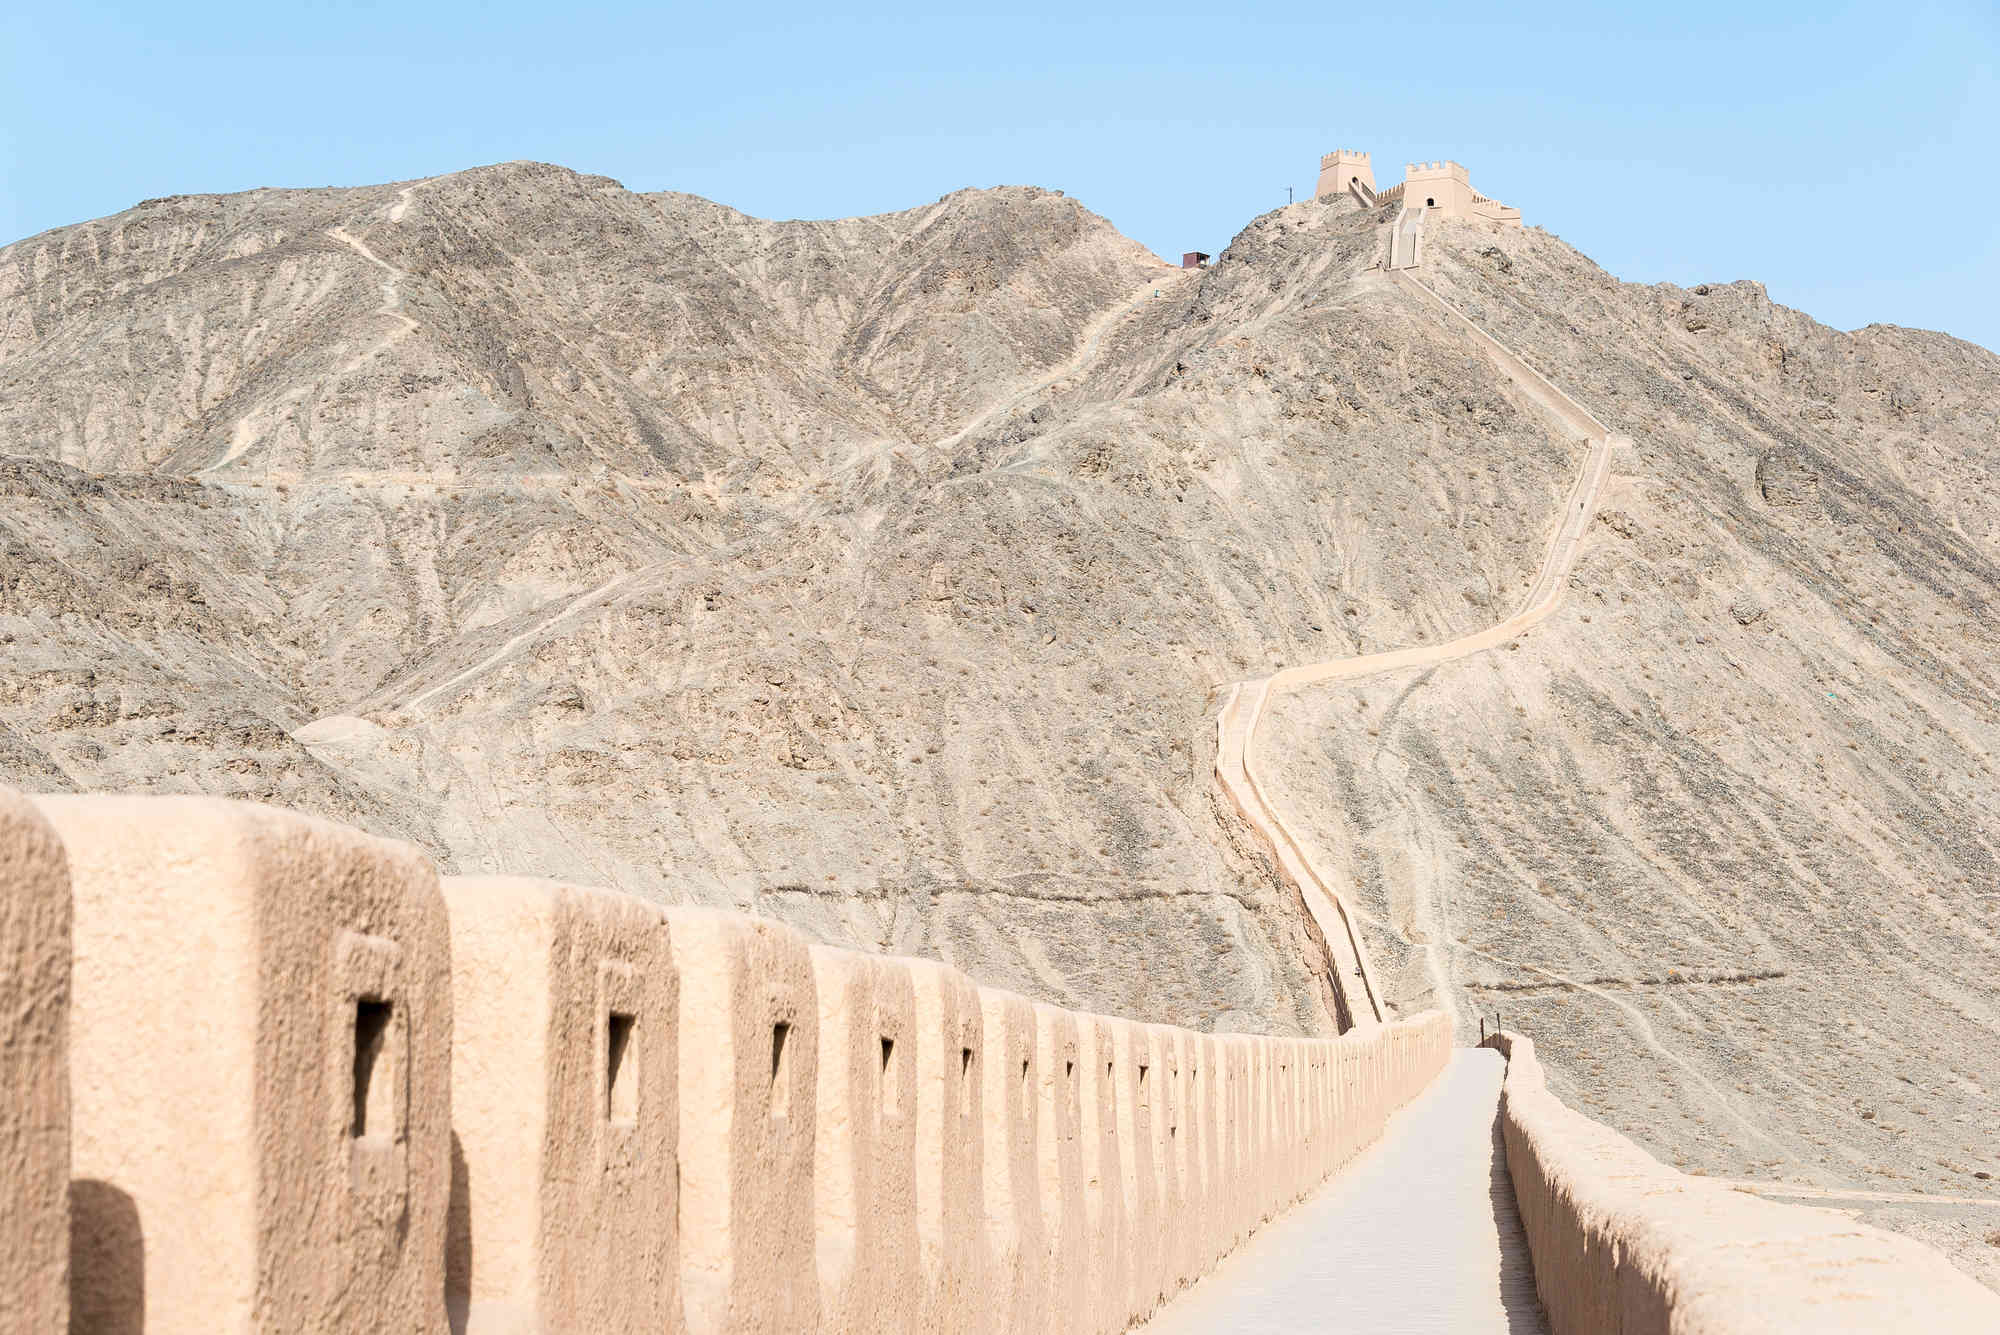 Traverse the ancient silk road